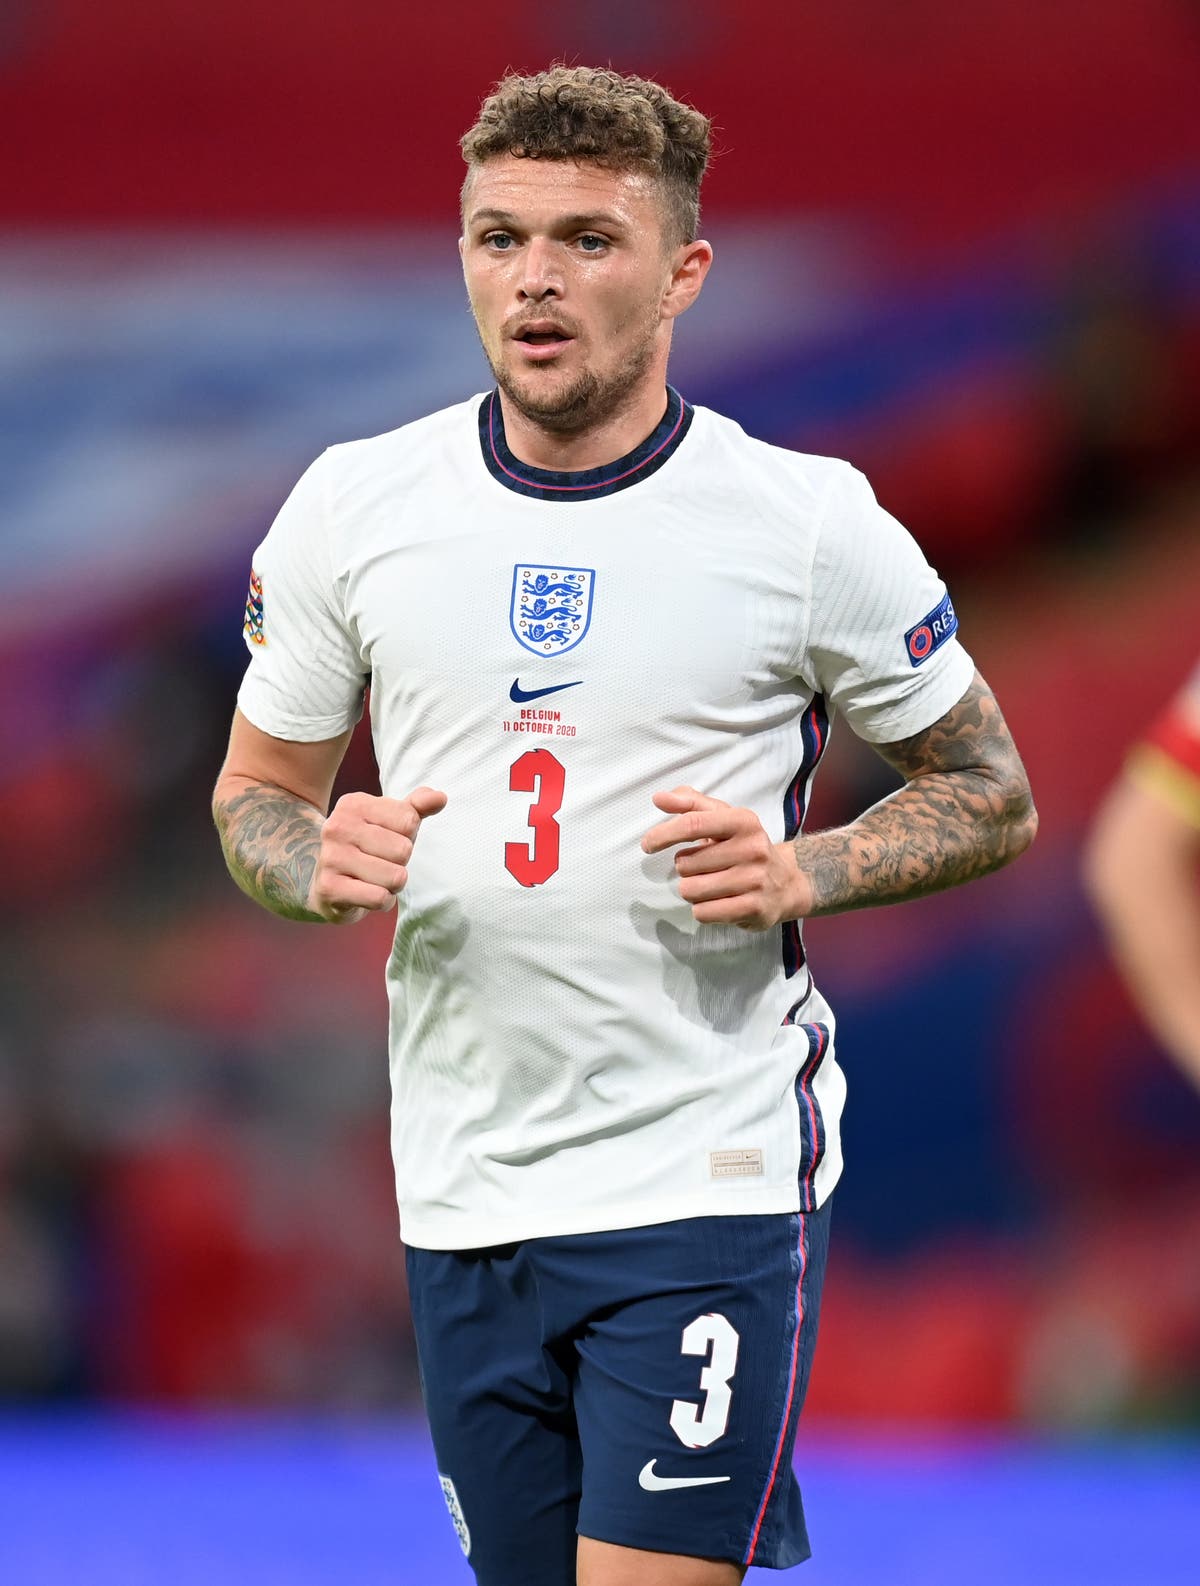 Kieran Trippier believes mix of talent and experience is right blend for England